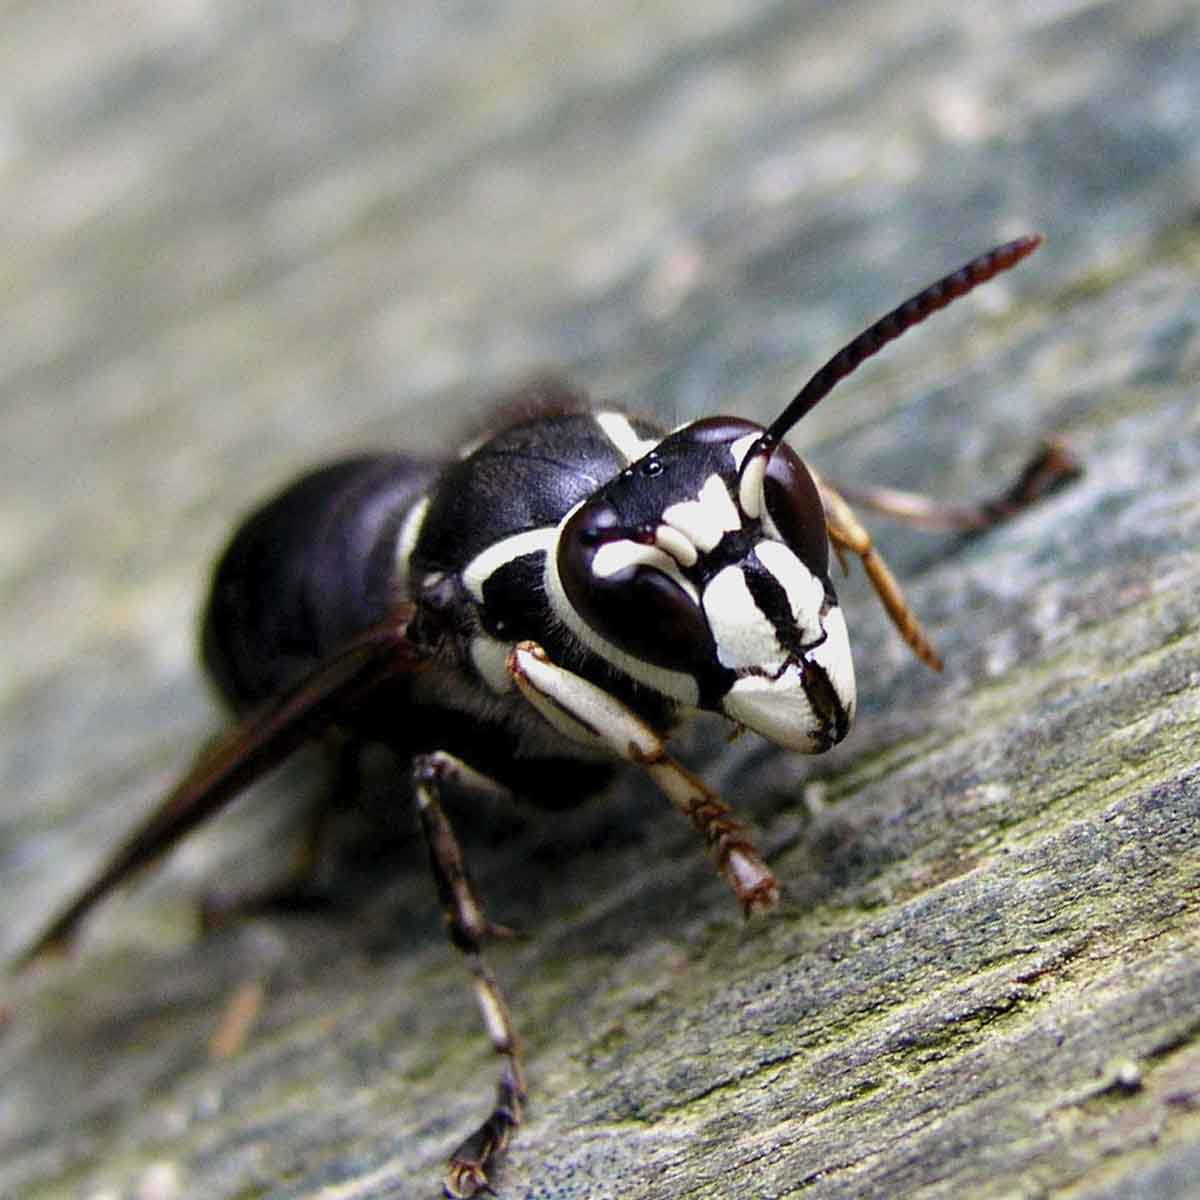 A black and white bald faced hornet